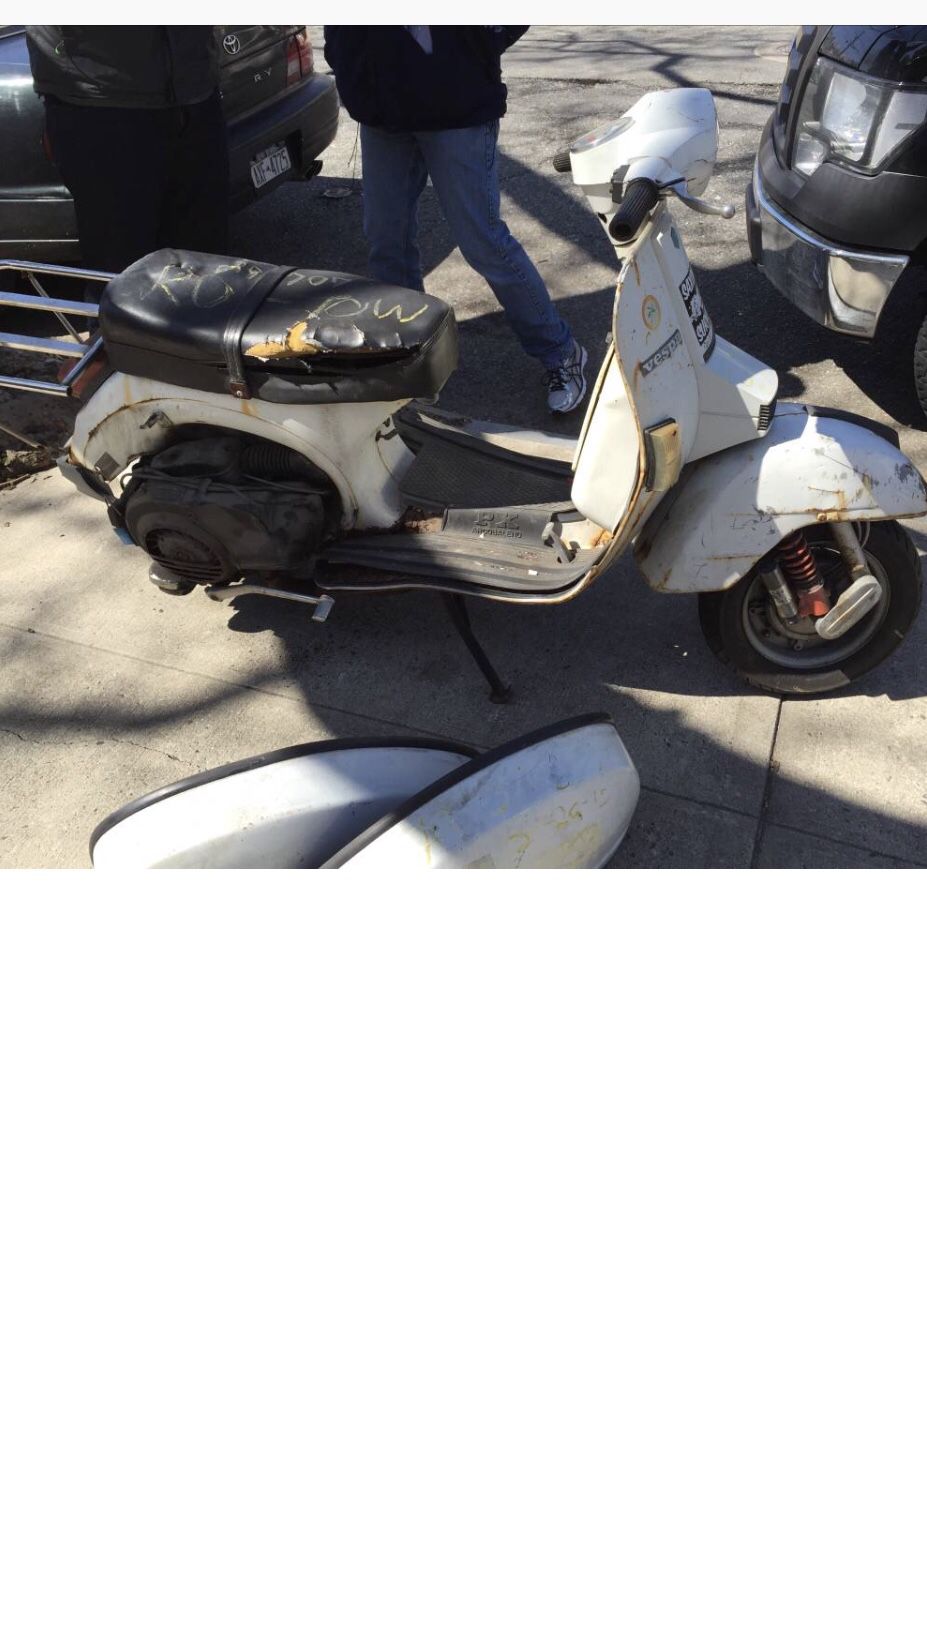 WTB your old Vespa